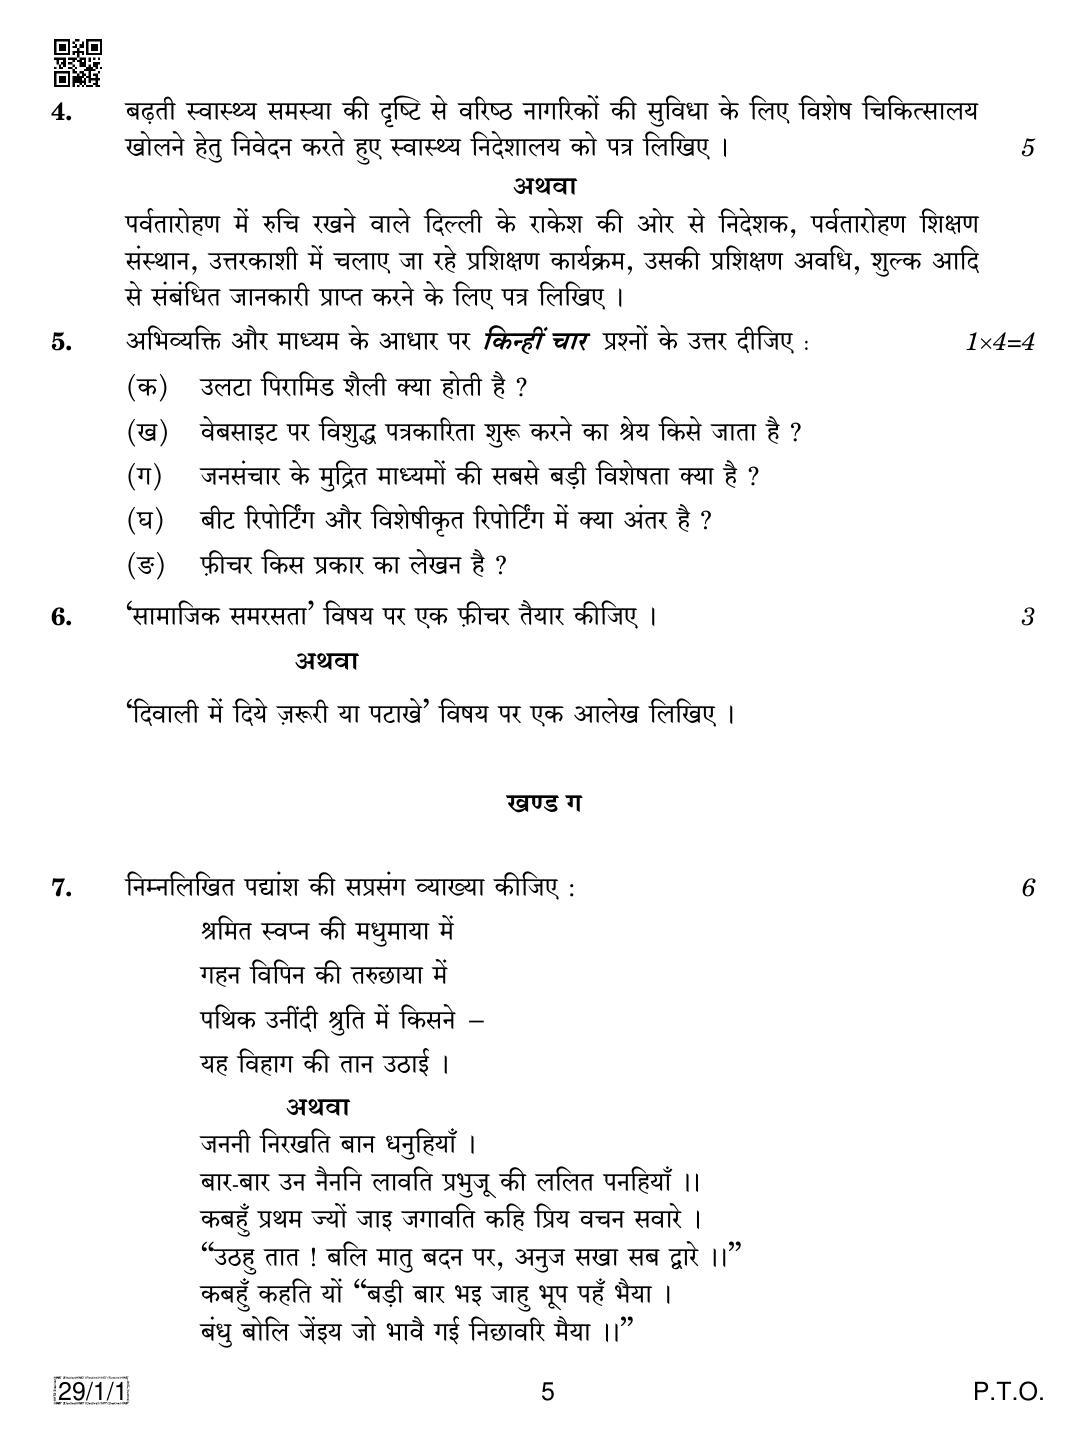 CBSE Class 12 29-1-1 HINDI ELECTIVE 2019 Compartment Question Paper - Page 5